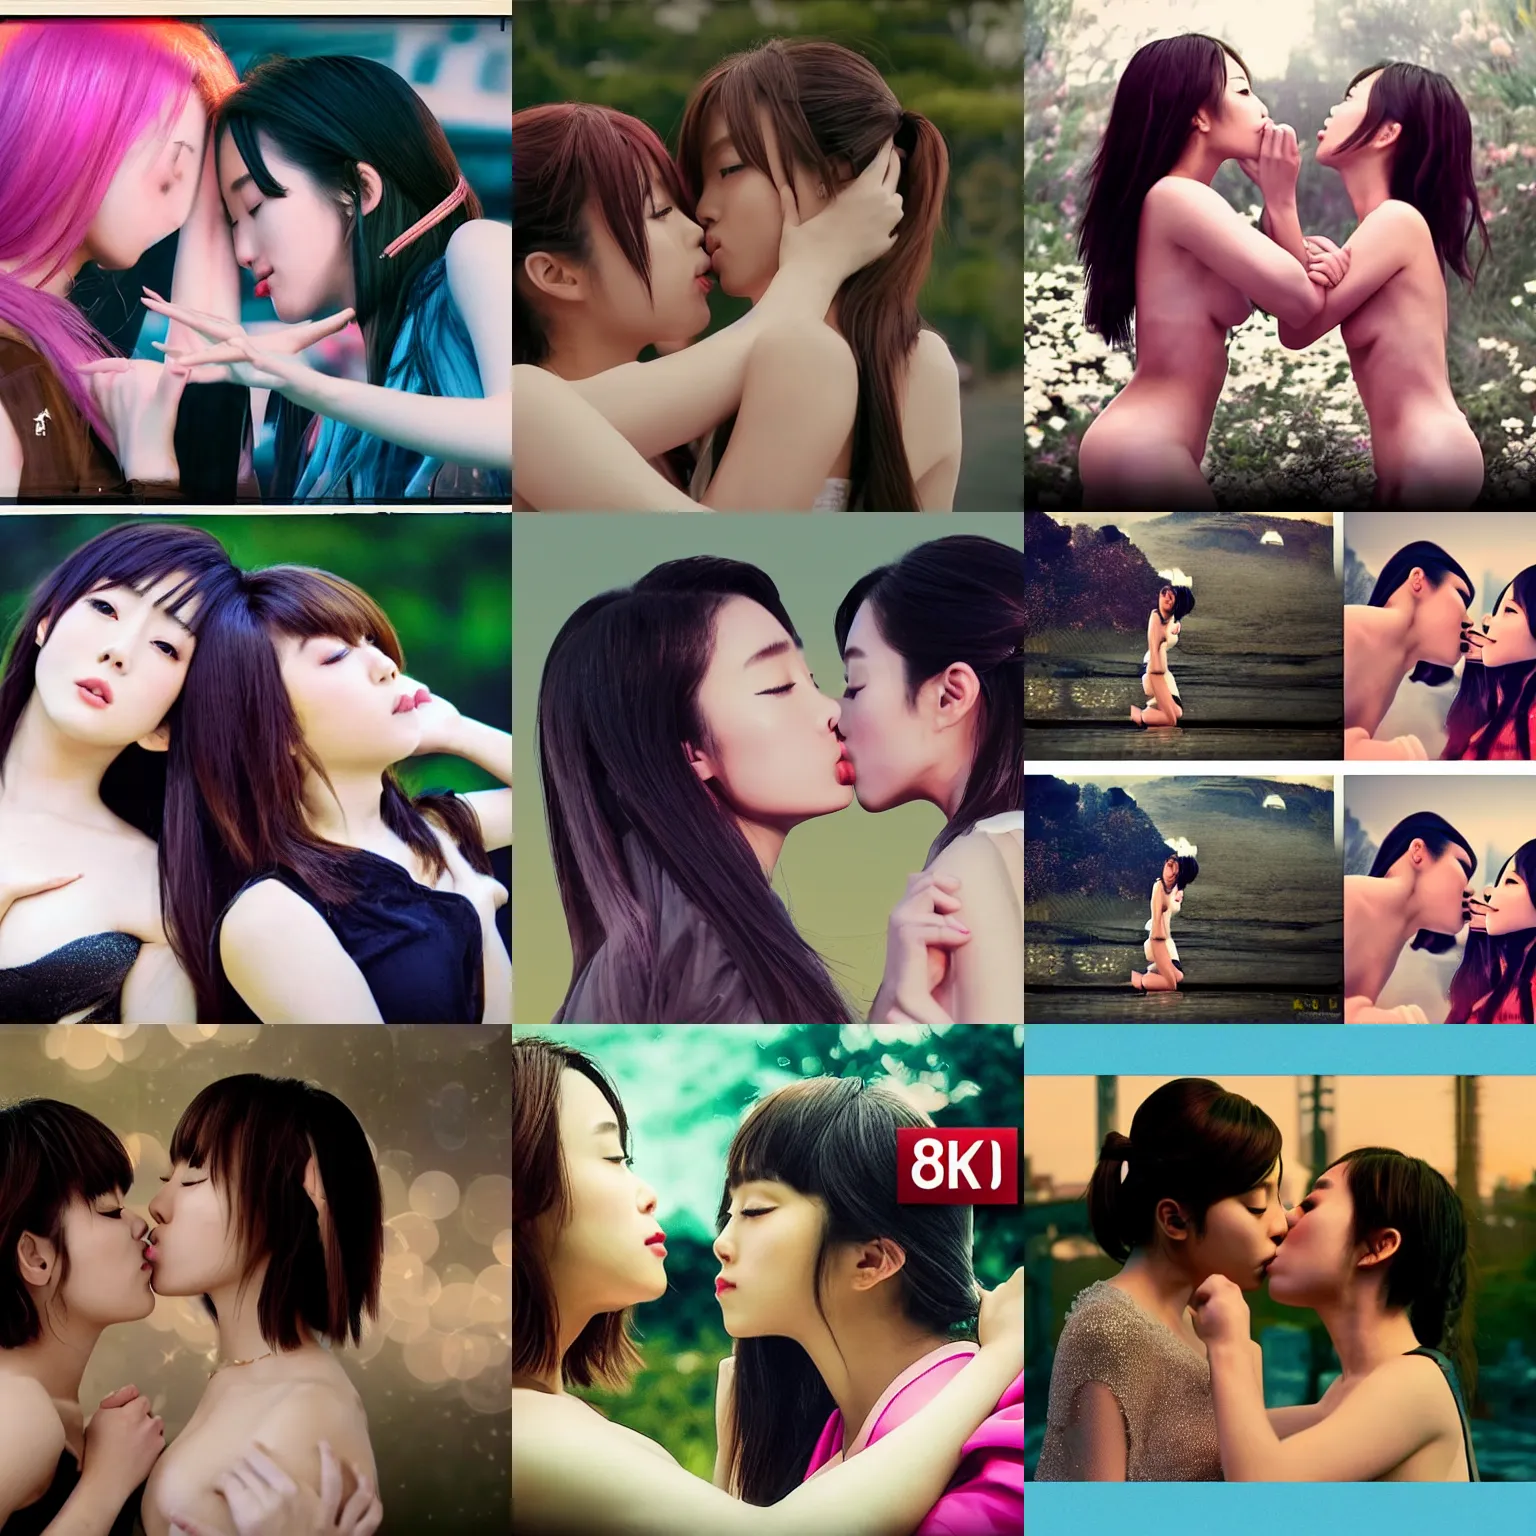 Prompt: unbelievably beautiful, perfect, dynamic, epic, cinematic 8 k hd movie shot, kiss of two japanese beautiful cute young j - pop av idols actresses girls, they kiss each other. motion, vfx, inspirational arthouse, high budget, hollywood style, at behance, at netflix, with instagram filters, photoshop, adobe lightroom, adobe after effects, taken with polaroid kodak portra